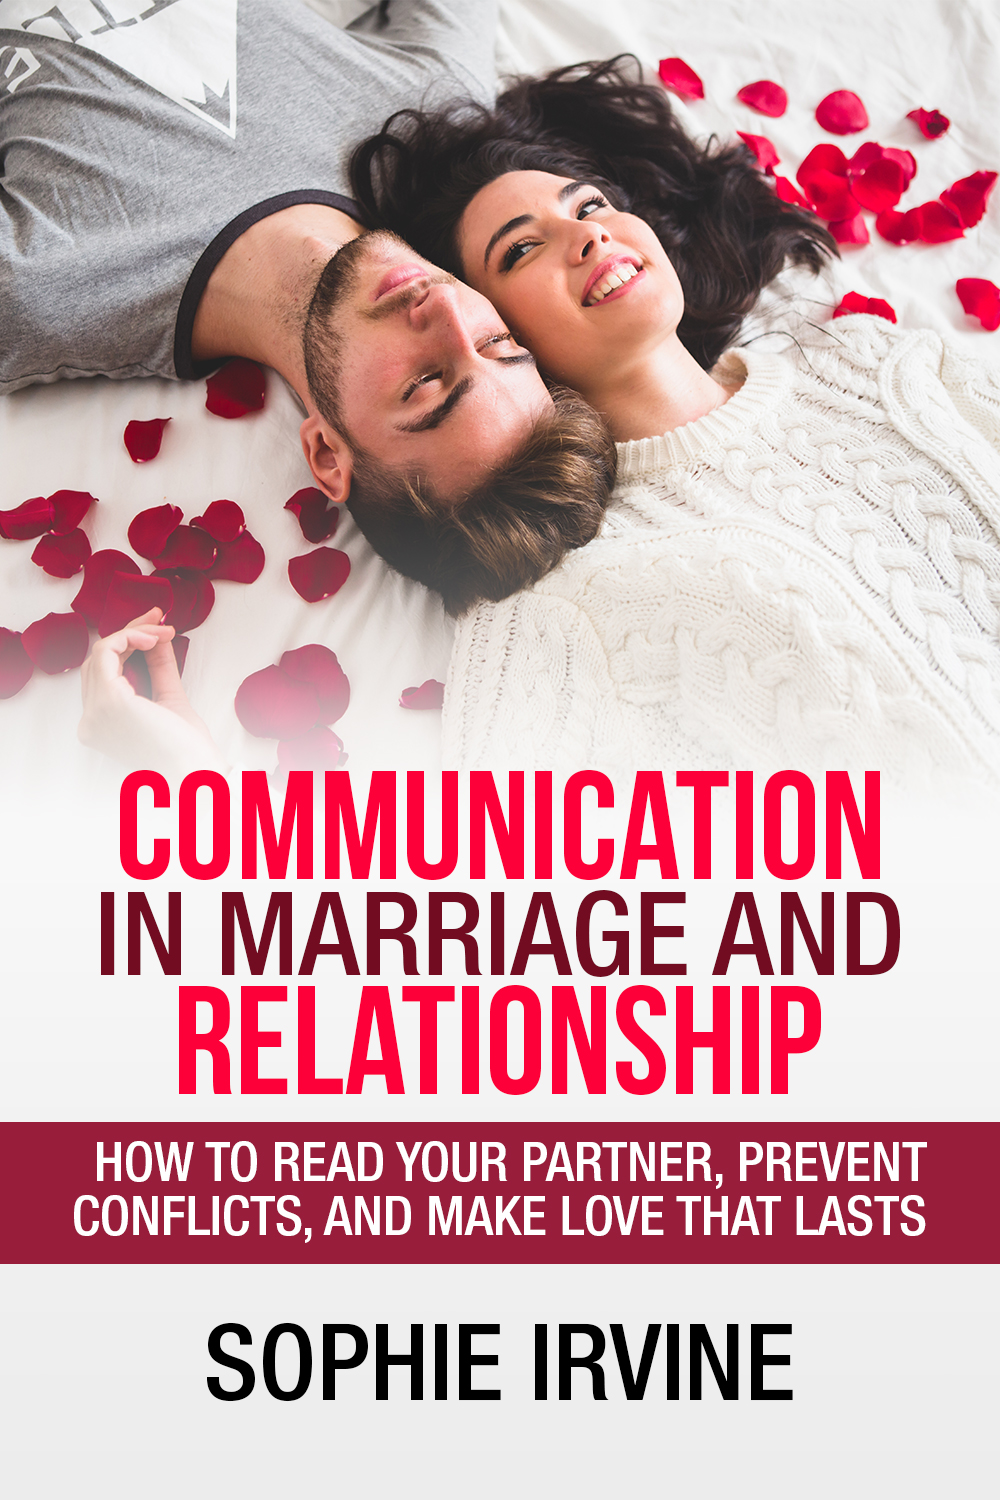 FREE: Communication in Marriage and Relationship: How to read Your Partner, Prevent Conflicts, and Make Love that Lasts by Sophie Irvine